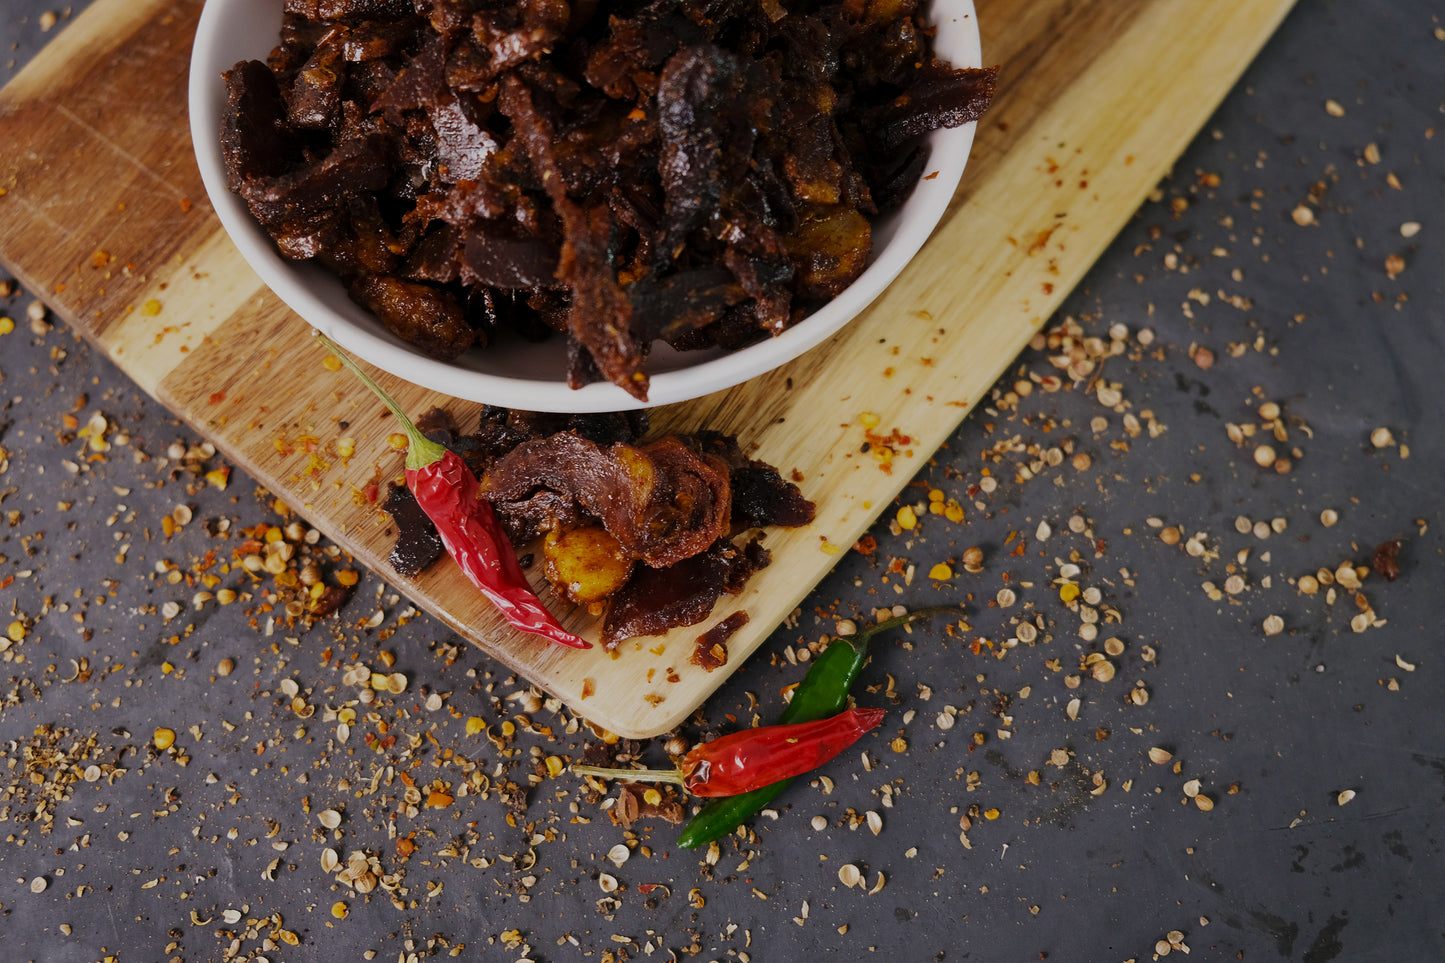 Babelaas Mix (Spicy Mixed Biltong and Dry Wors)